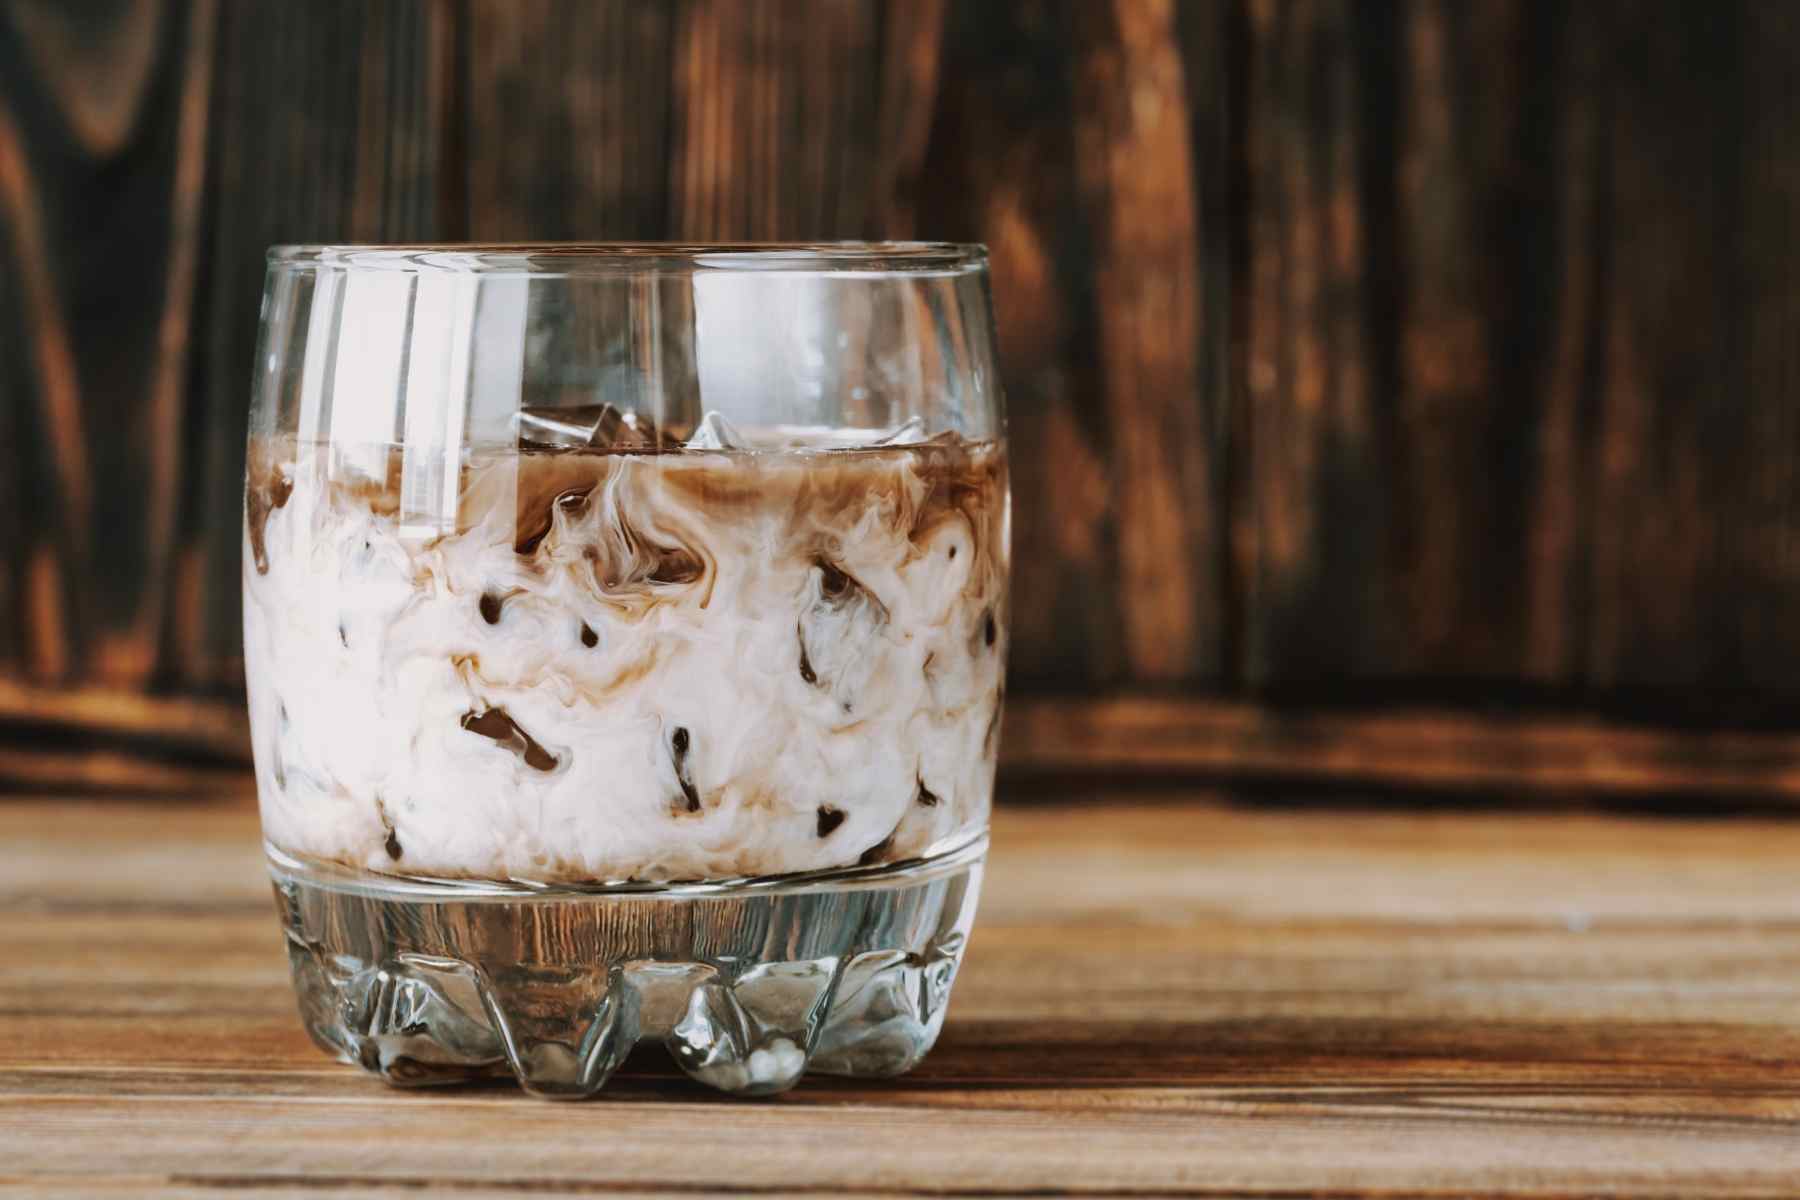 “Drunk” Your Cookies Into Tribe’s CBD Oreo White Russian